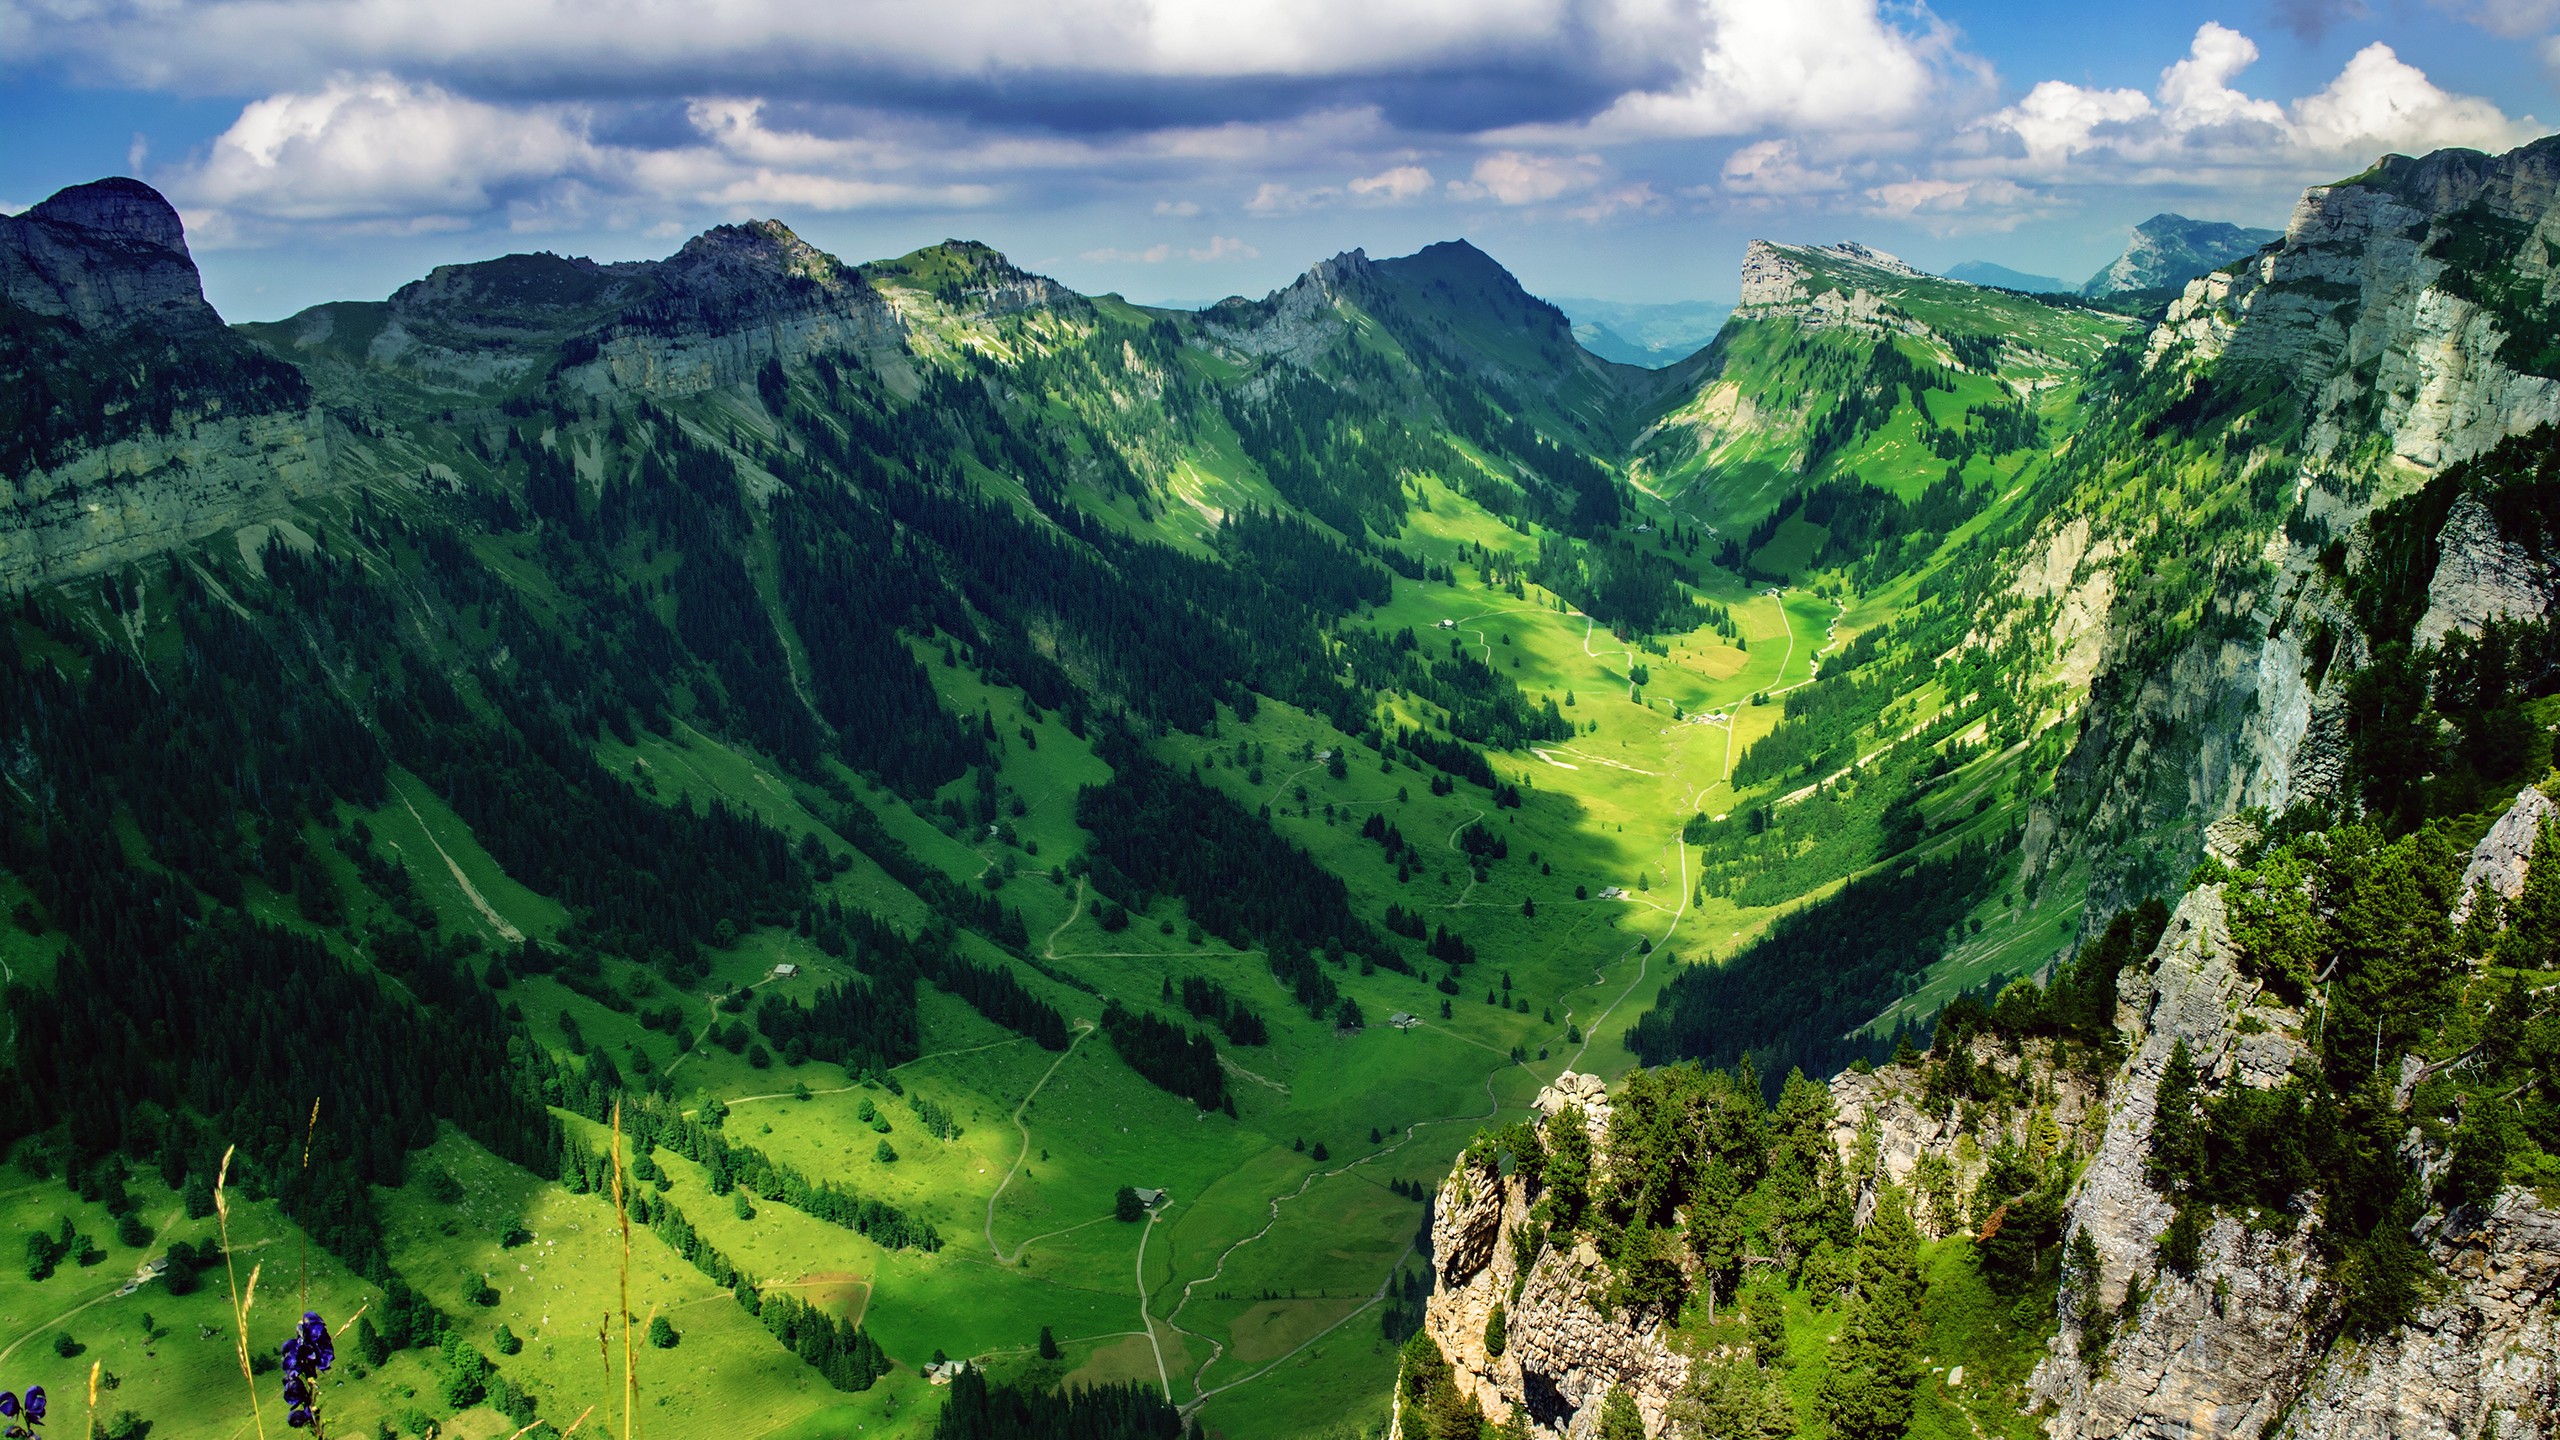 General 2560x1440 landscape mountains valley aerial view Alps